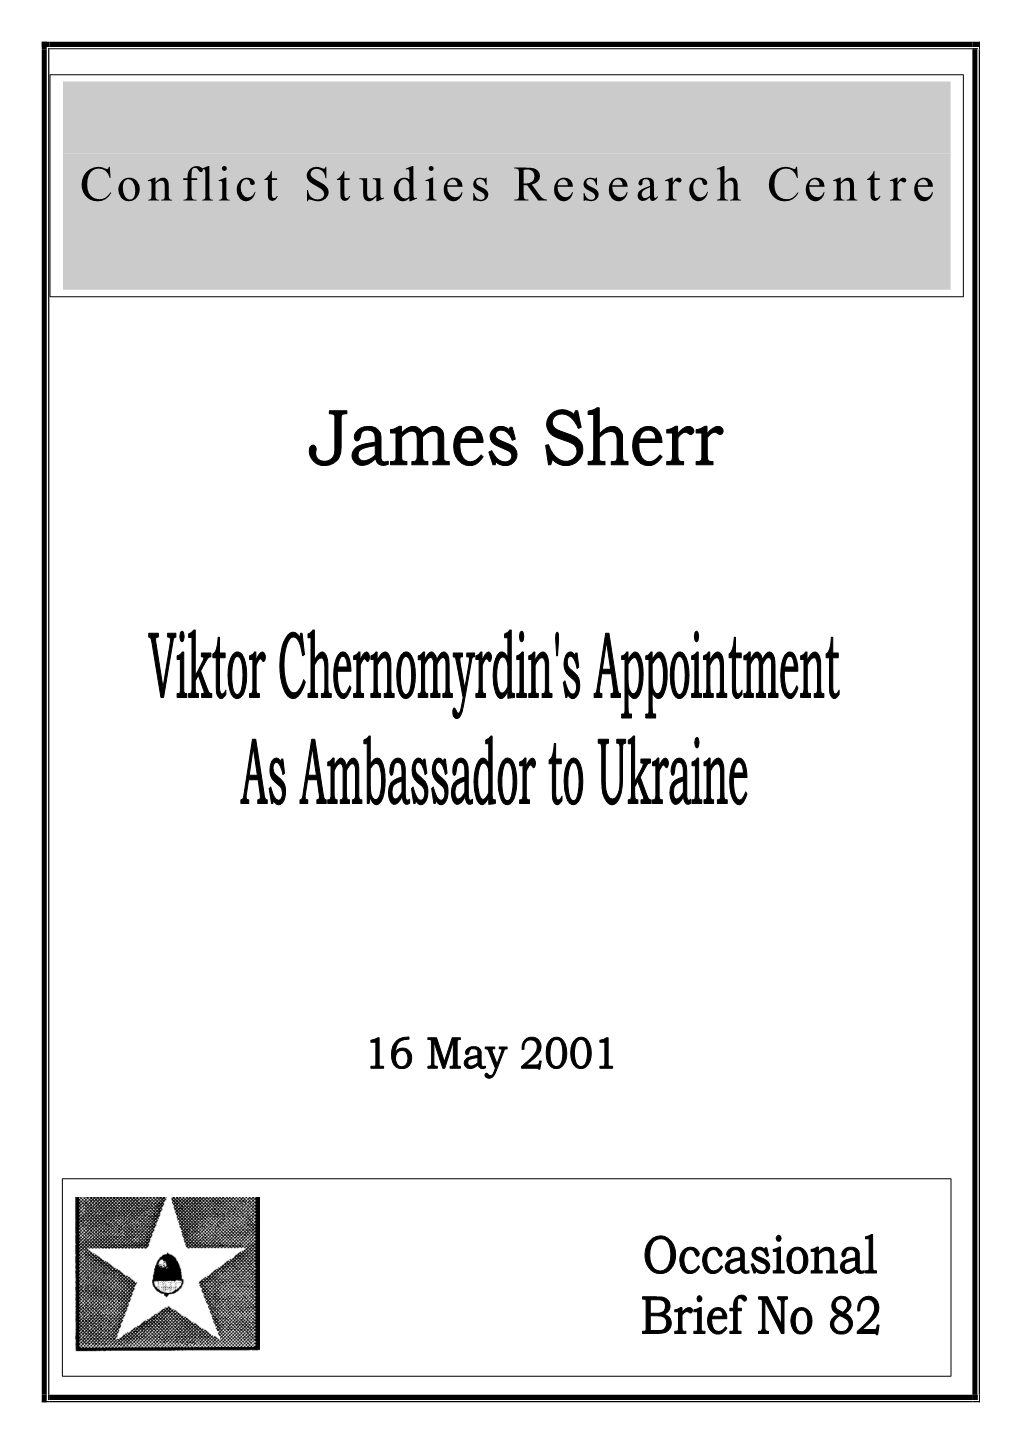 Viktor Chernomyrdin's Appointment As Ambassador to Ukraine Conflict Studies Research Centre ISBN 1-903584-31-0 16 May 2001 OB82